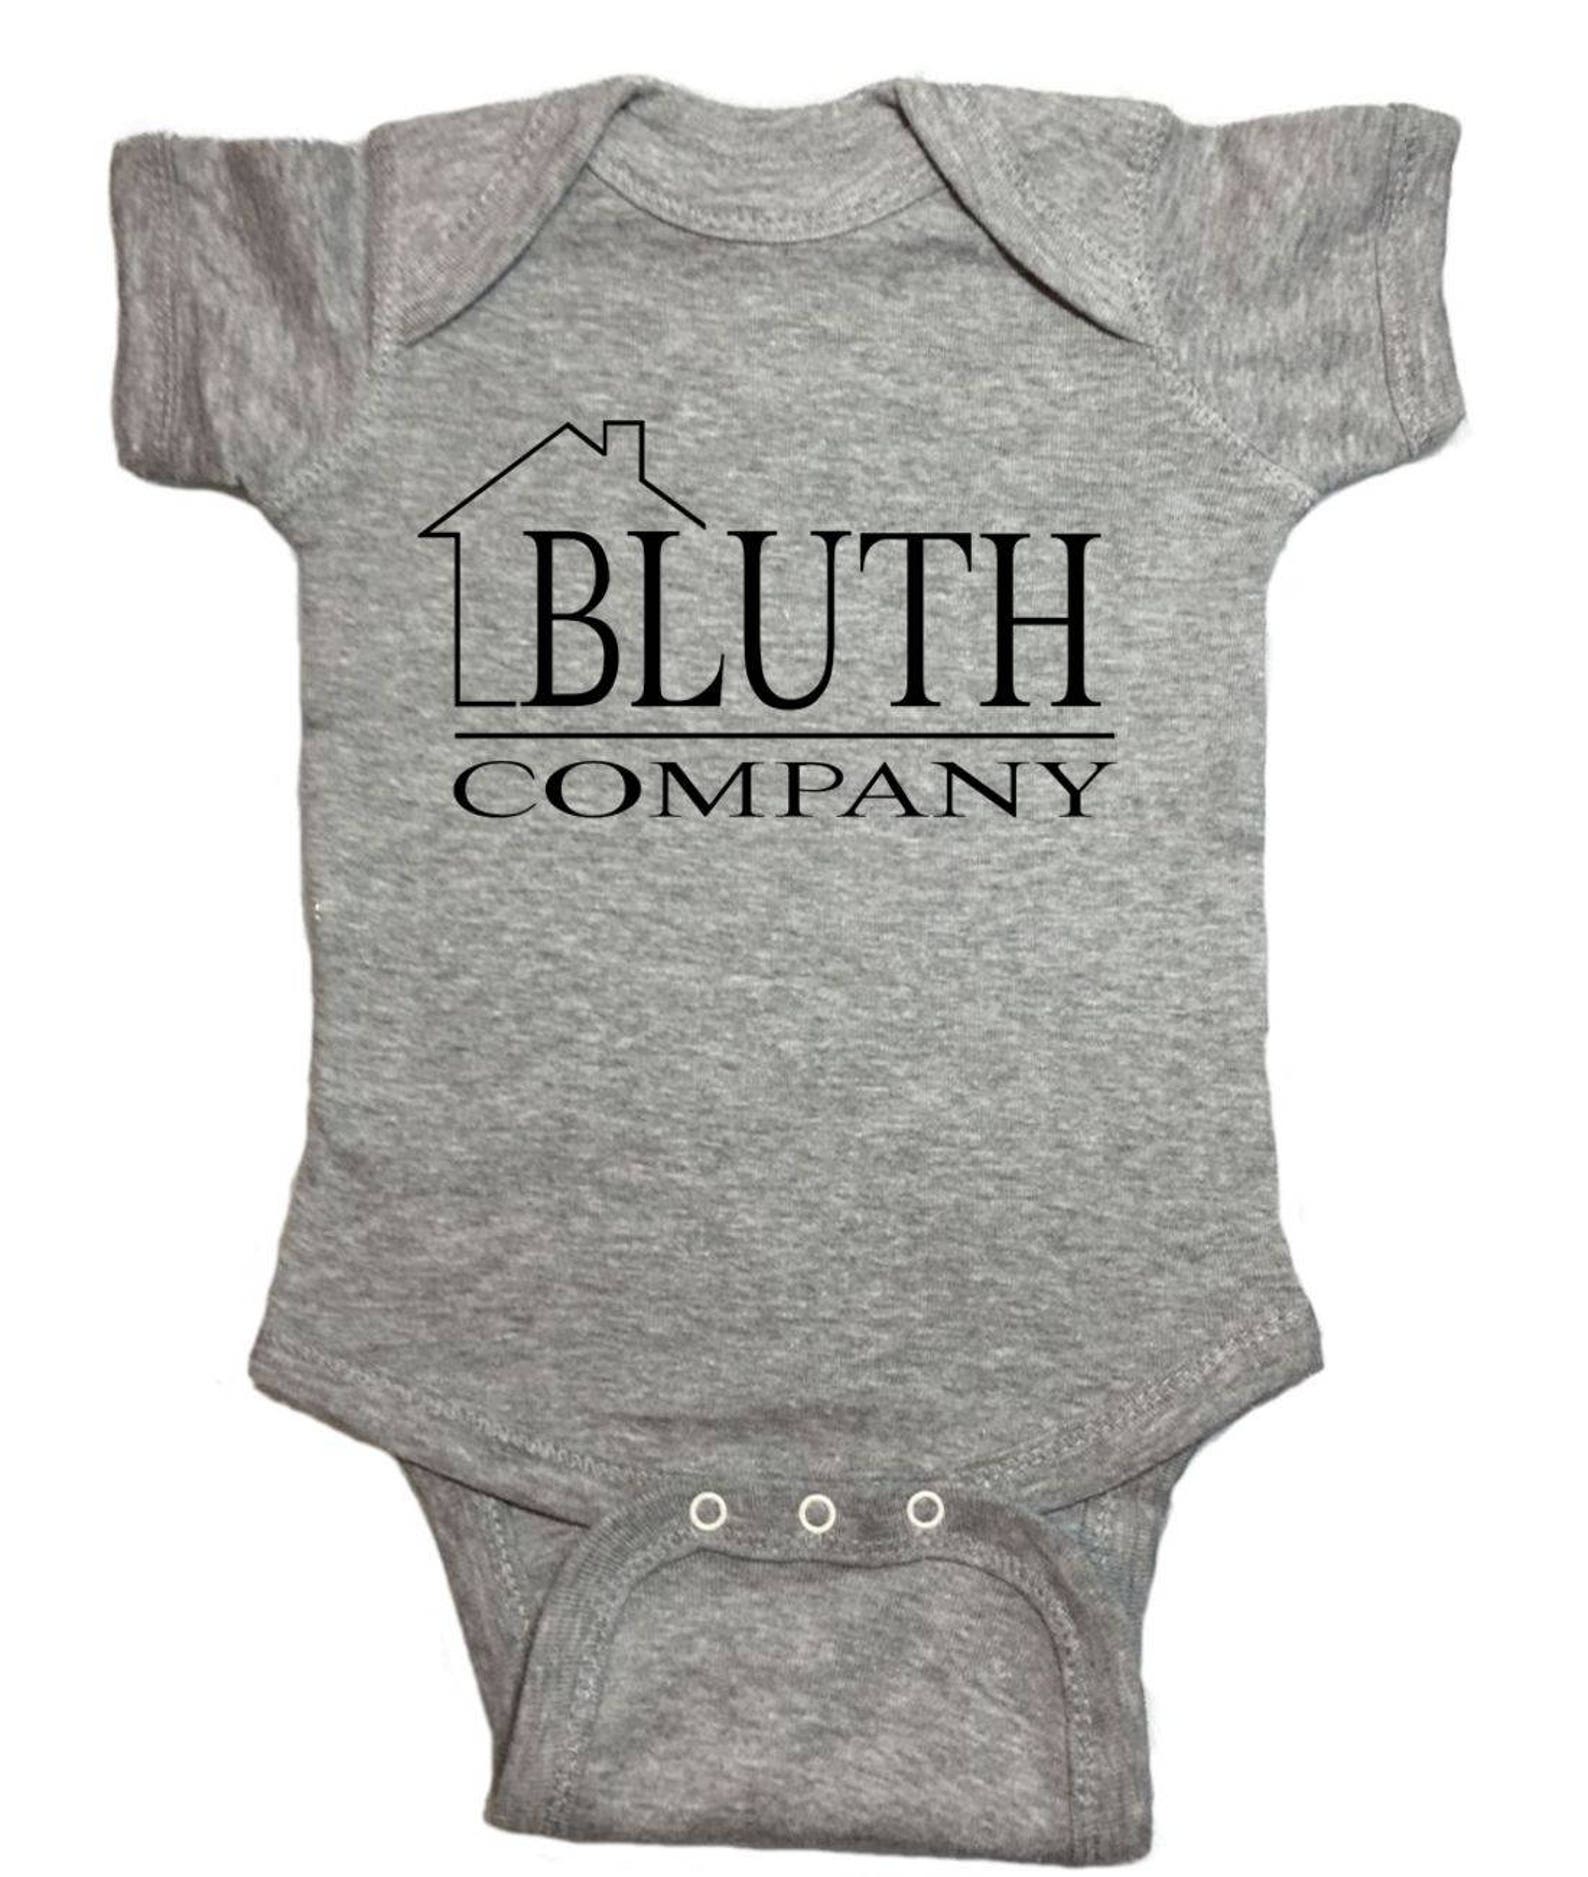 Why the Arrested Development Baby Onesie is a Must-Have for Fans